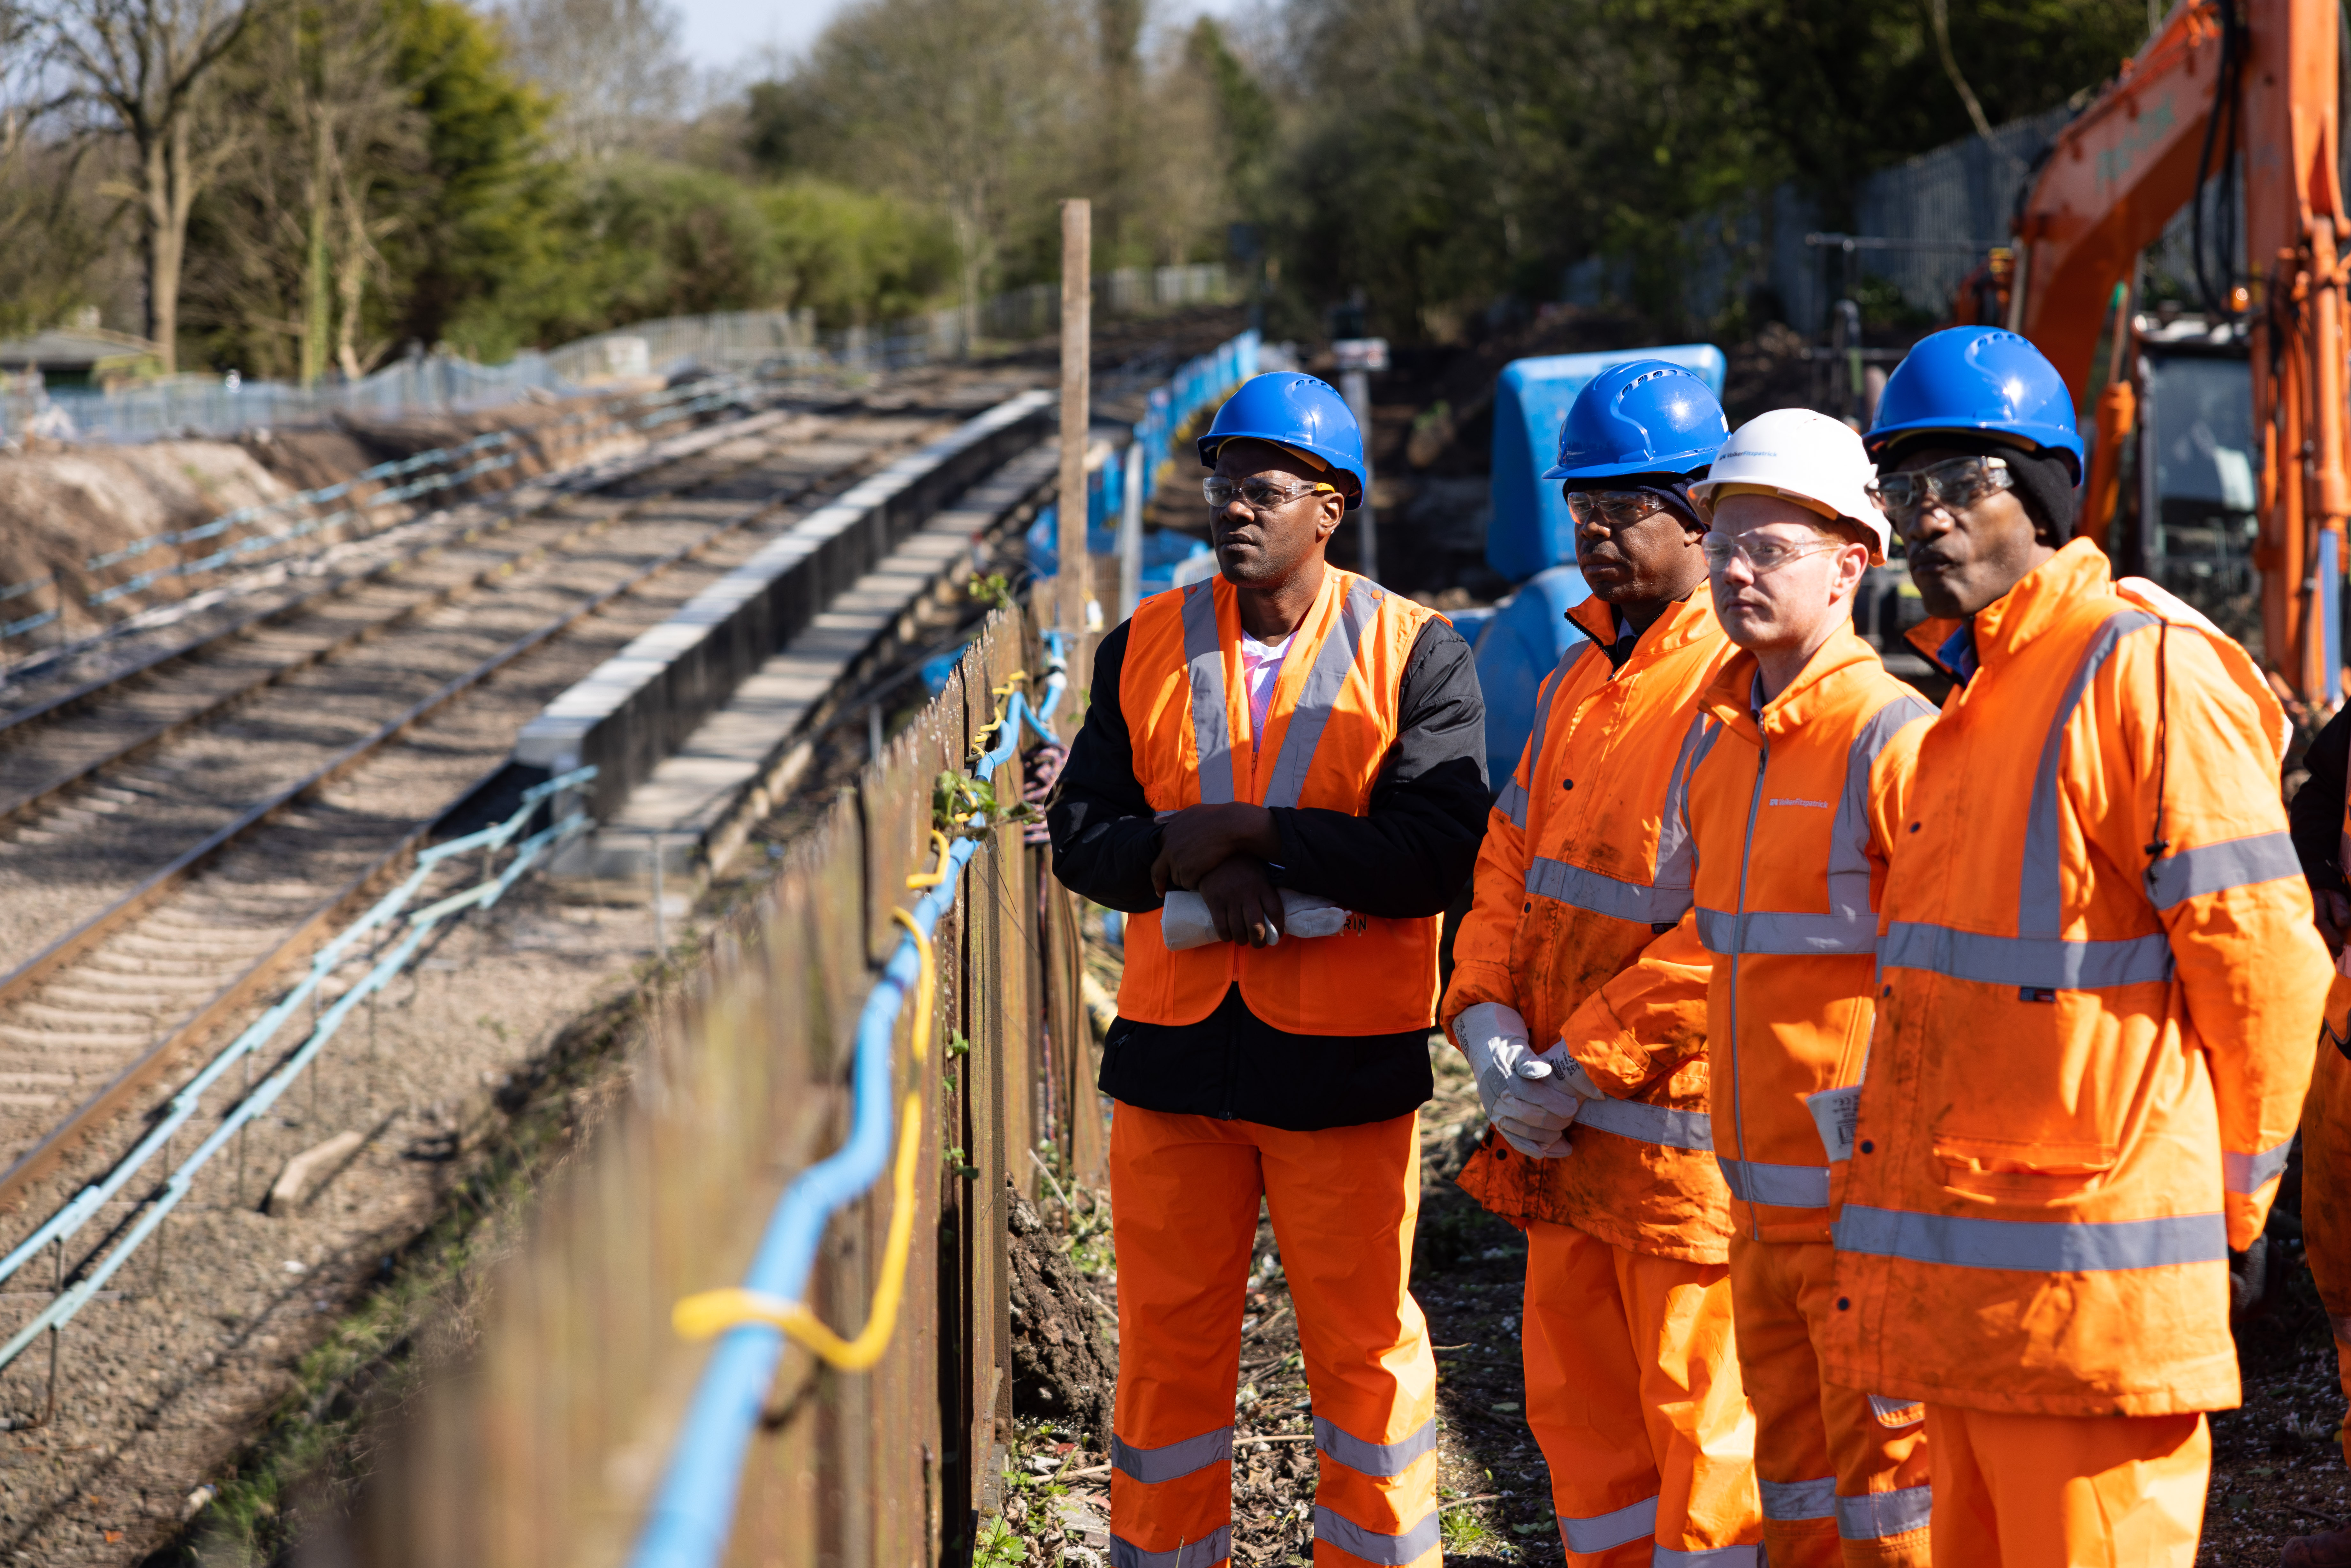 Delegates from Jamaica at the Pineapple Road station site in south Birmingham.